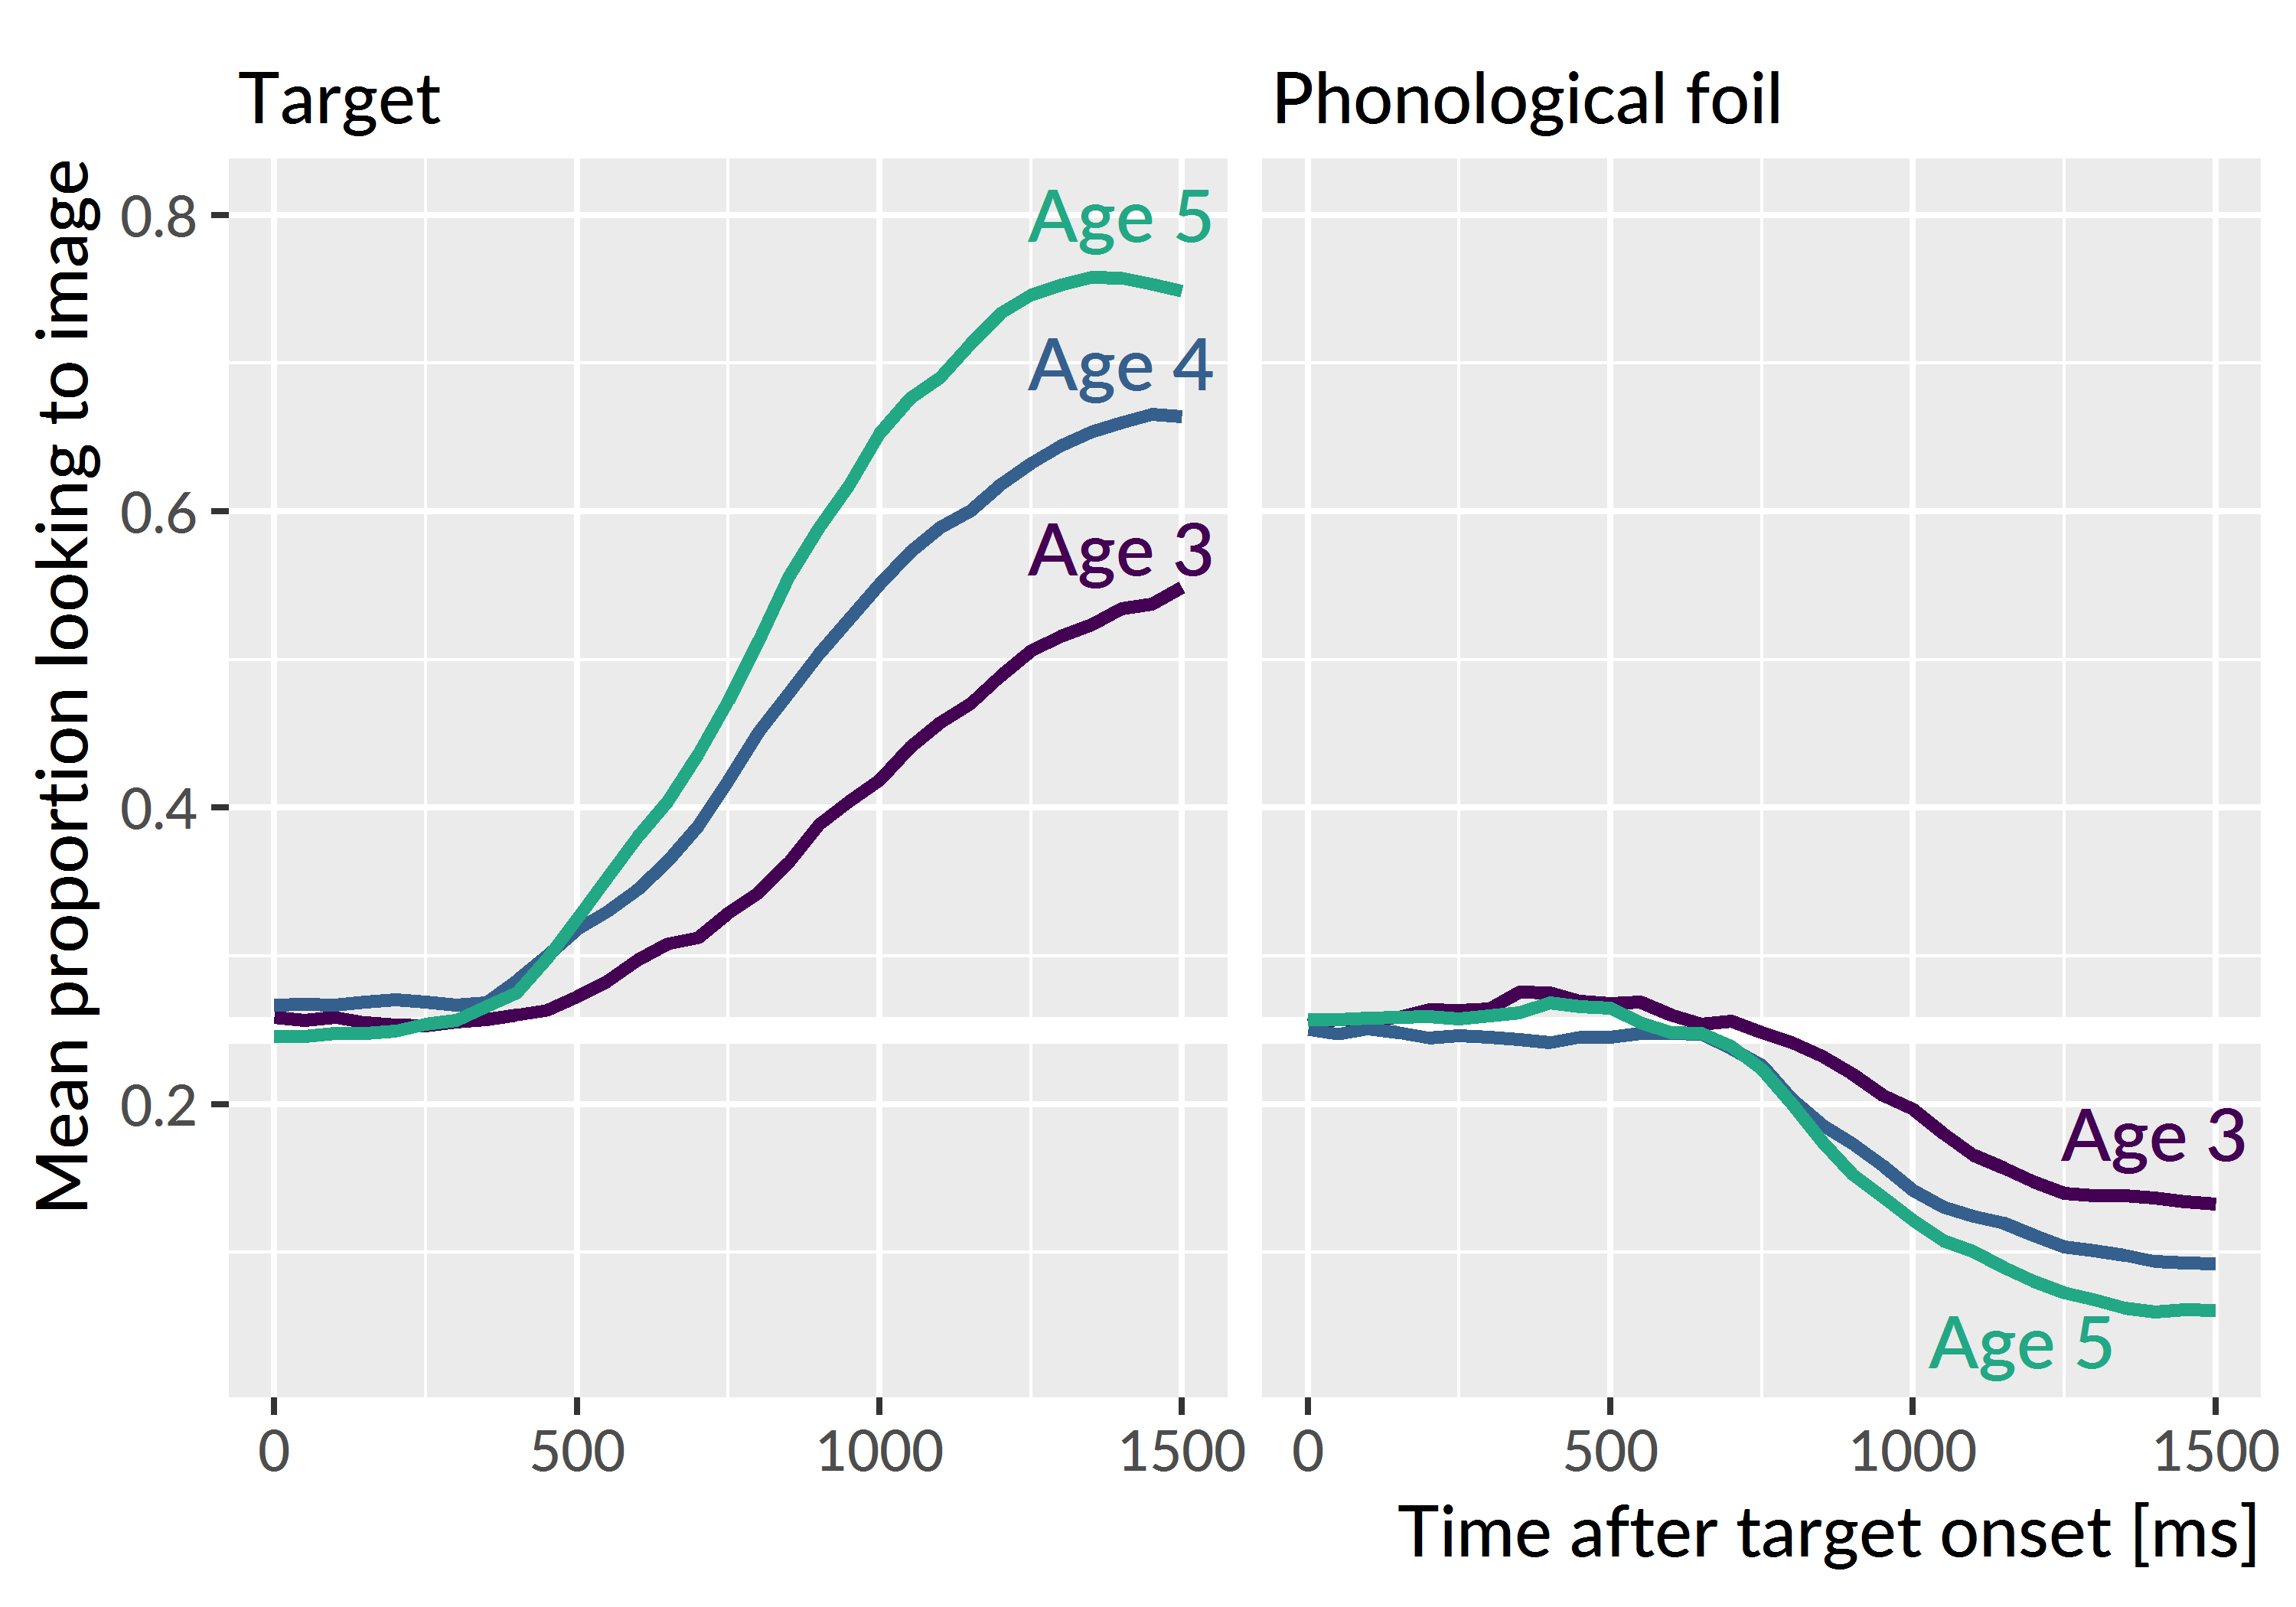 Because children looked more to the target as they grew older, they numerically looked less the foils too. This effect is why I evaluated the phonological and semantic foils by comparing them against the unrelated image.